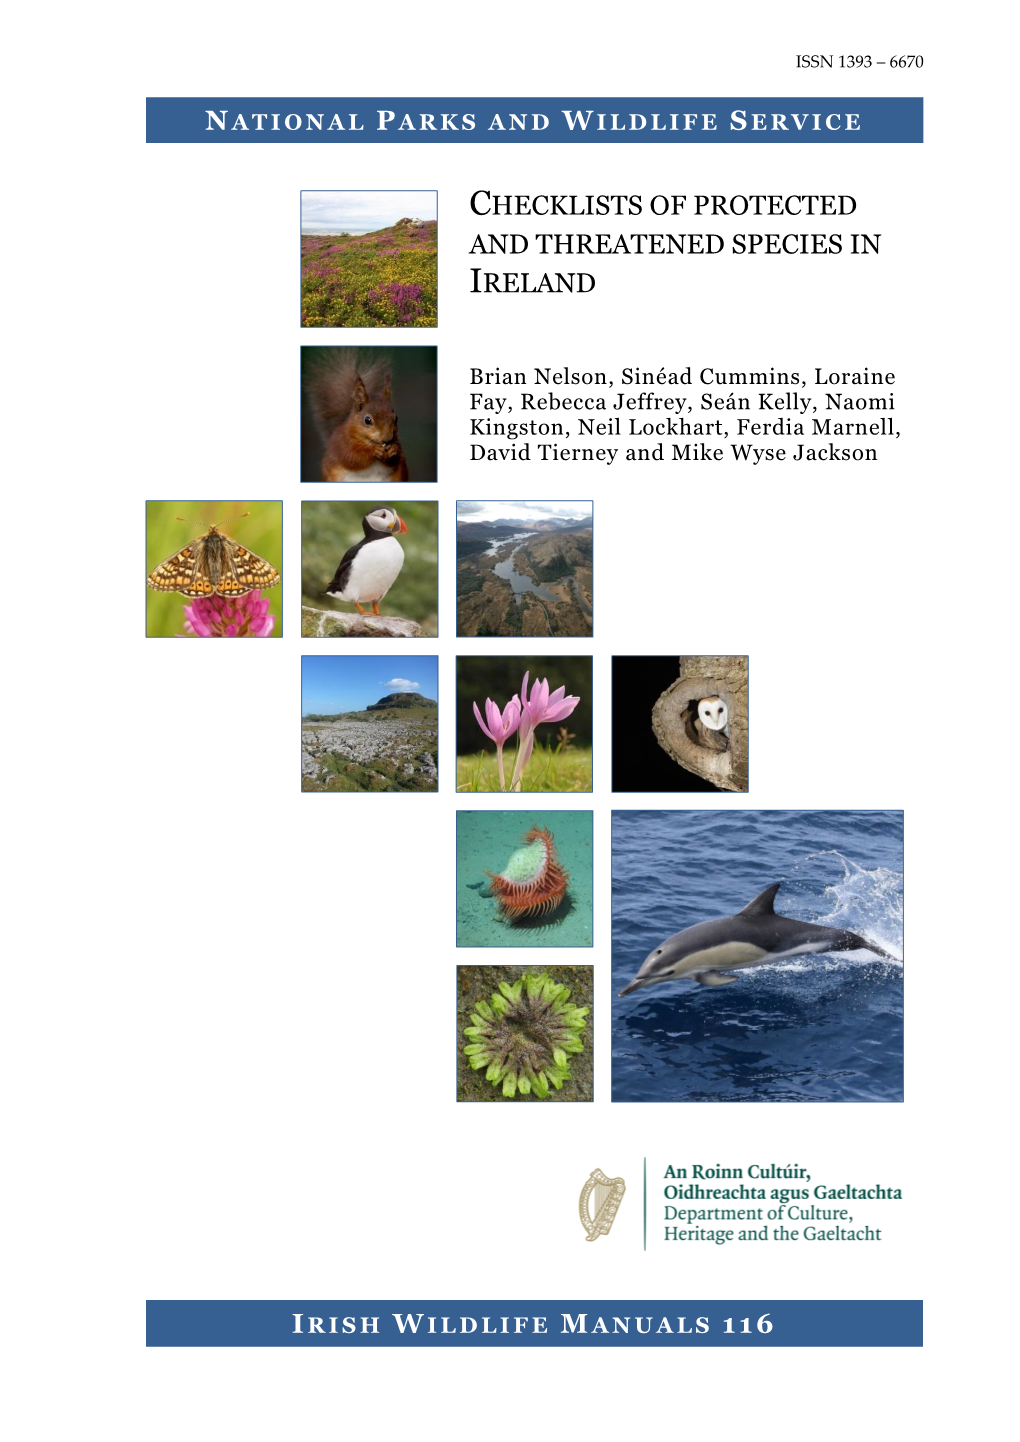 Checklists of Protected and Threatened Species in Ireland